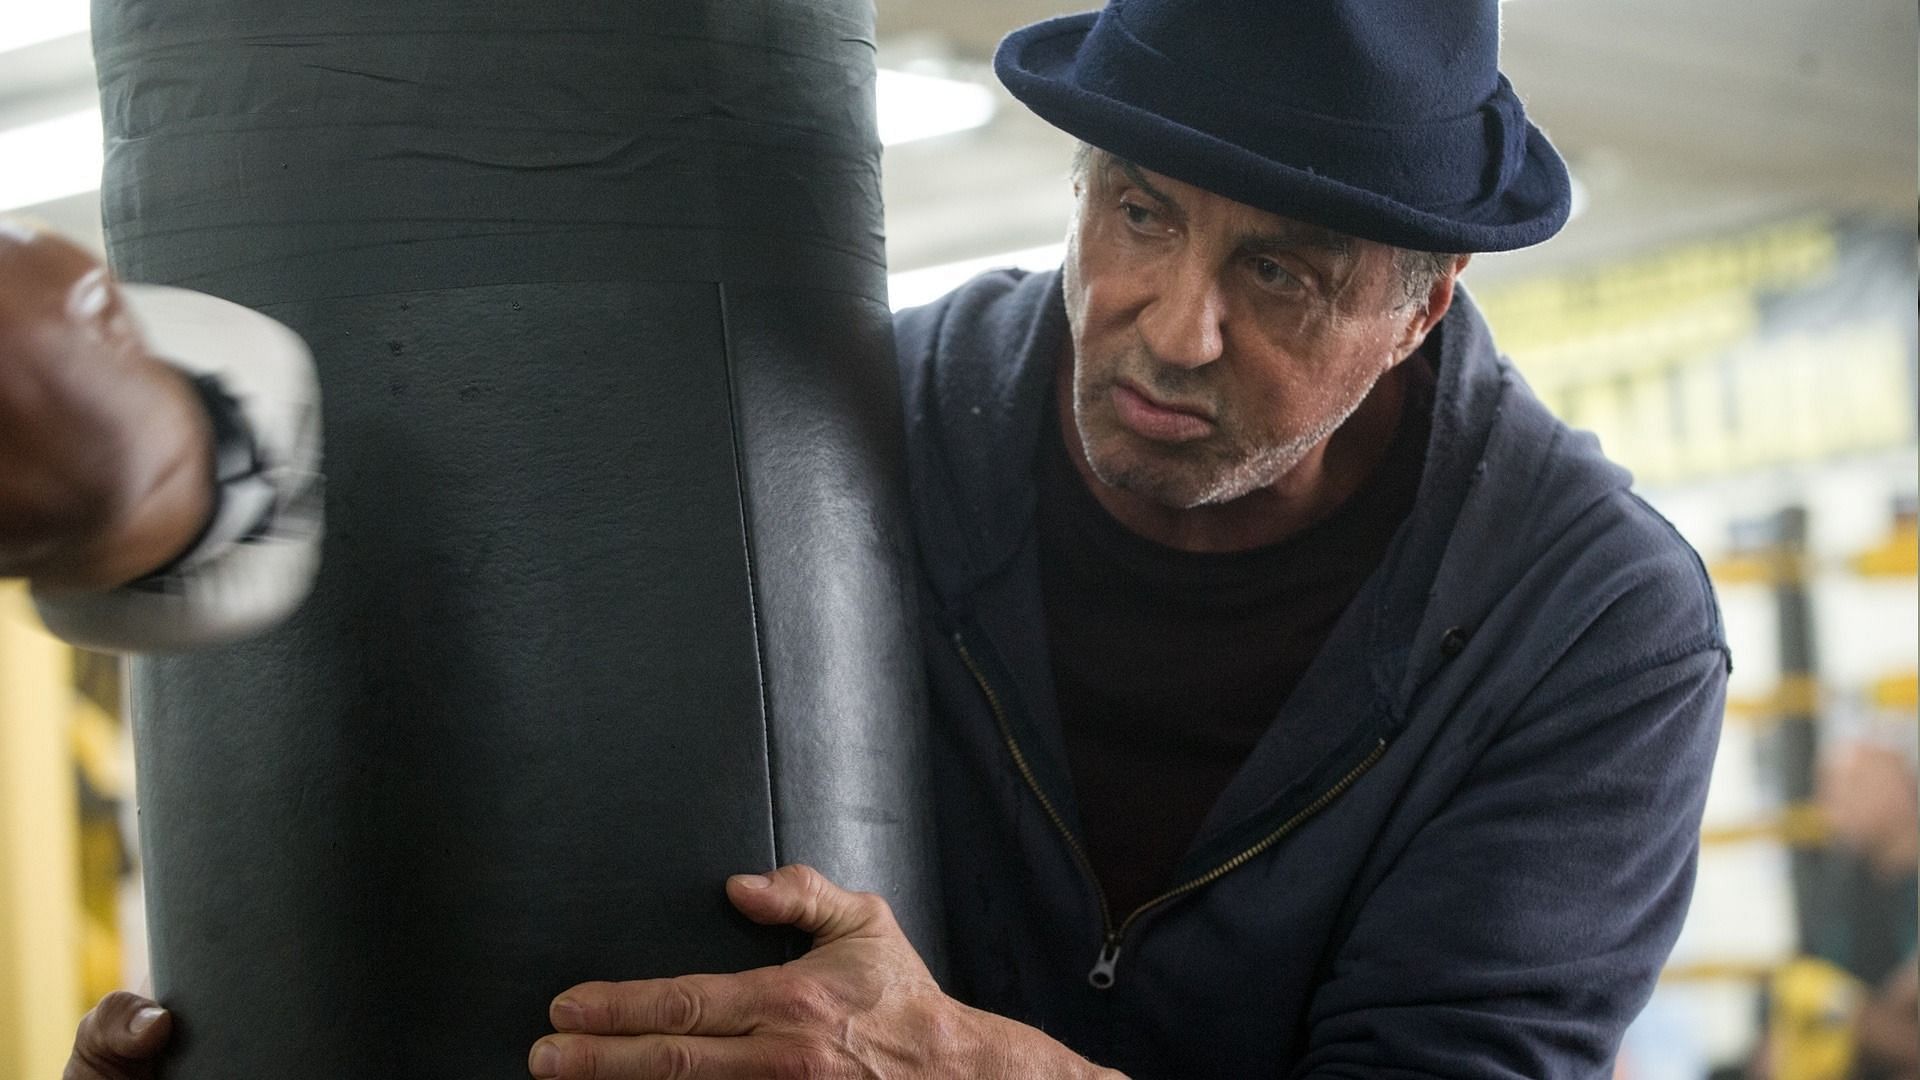 Sylvester Stallone in Creed II (Image via MGM Studios)